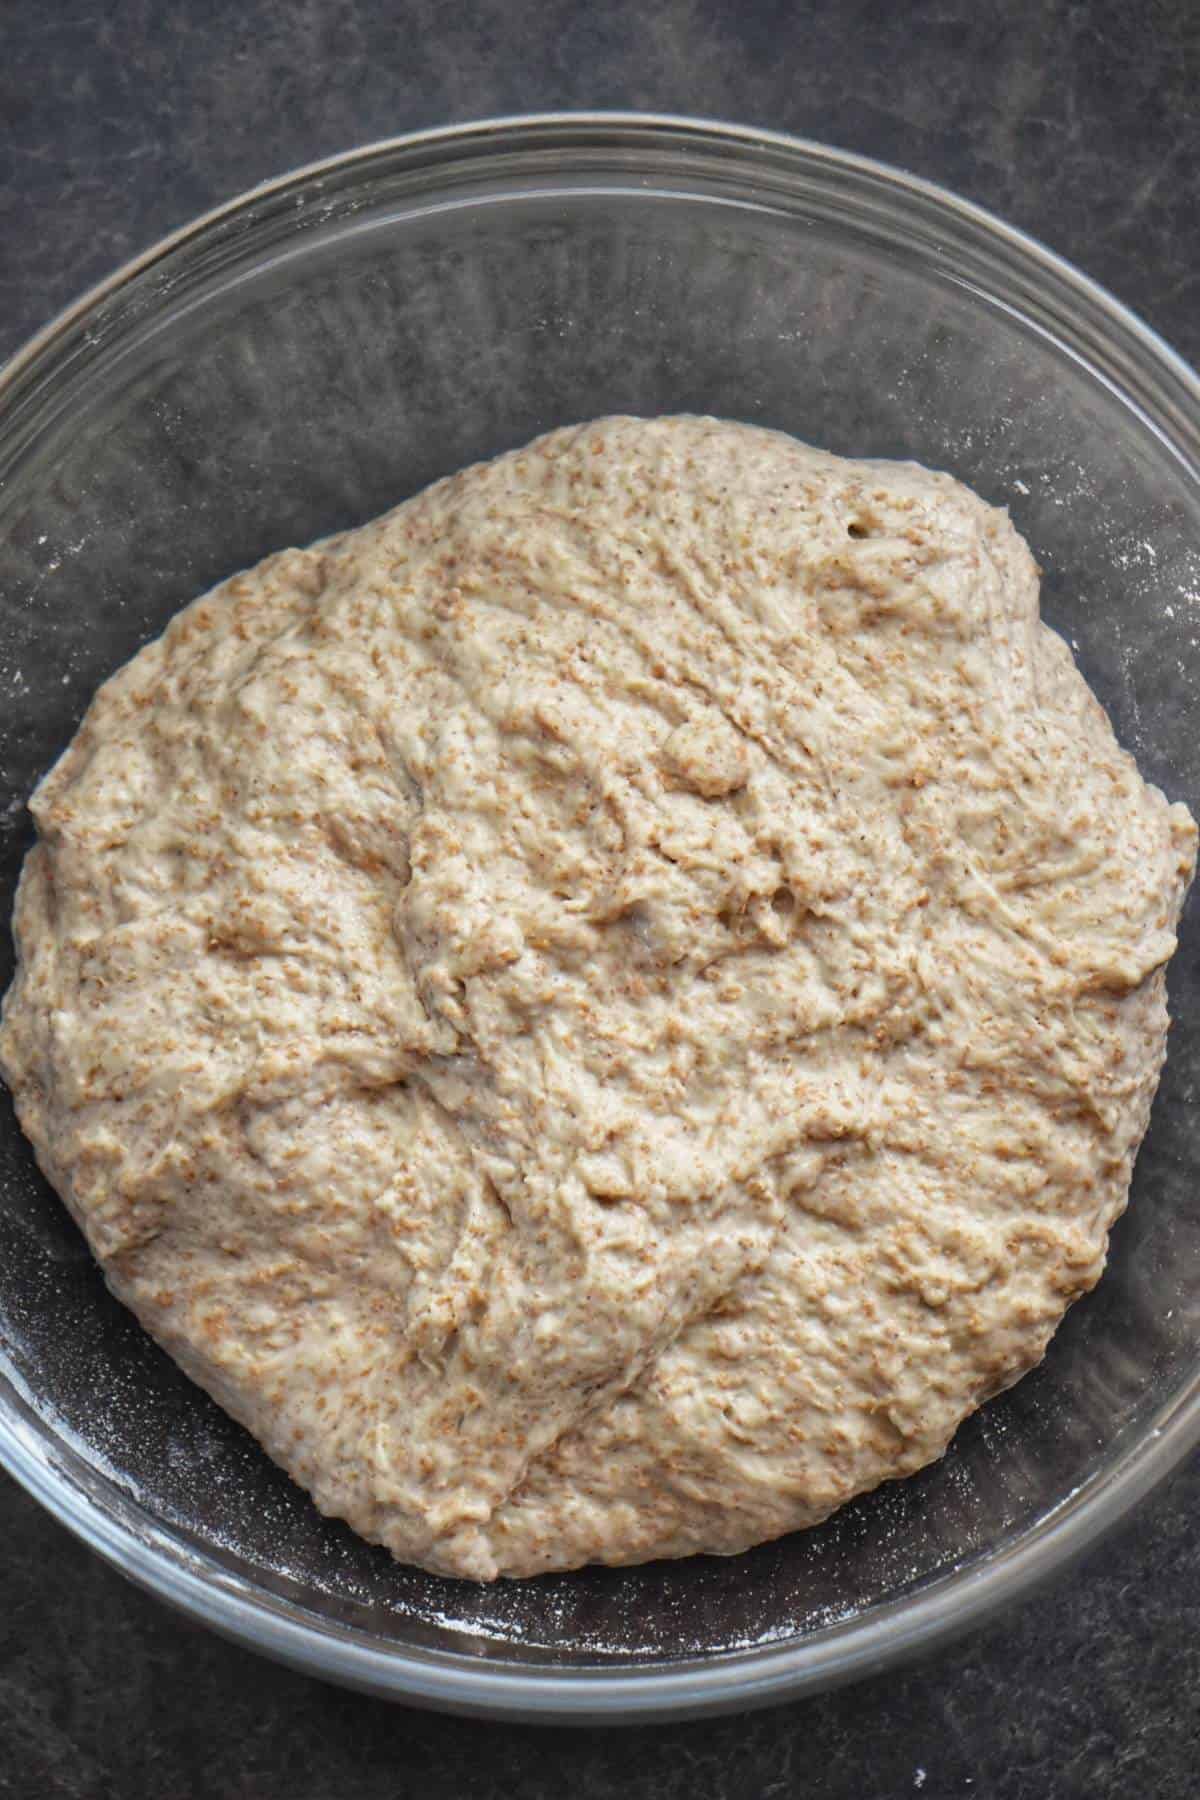 A ball of whole wheat pizza dough in a bowl.